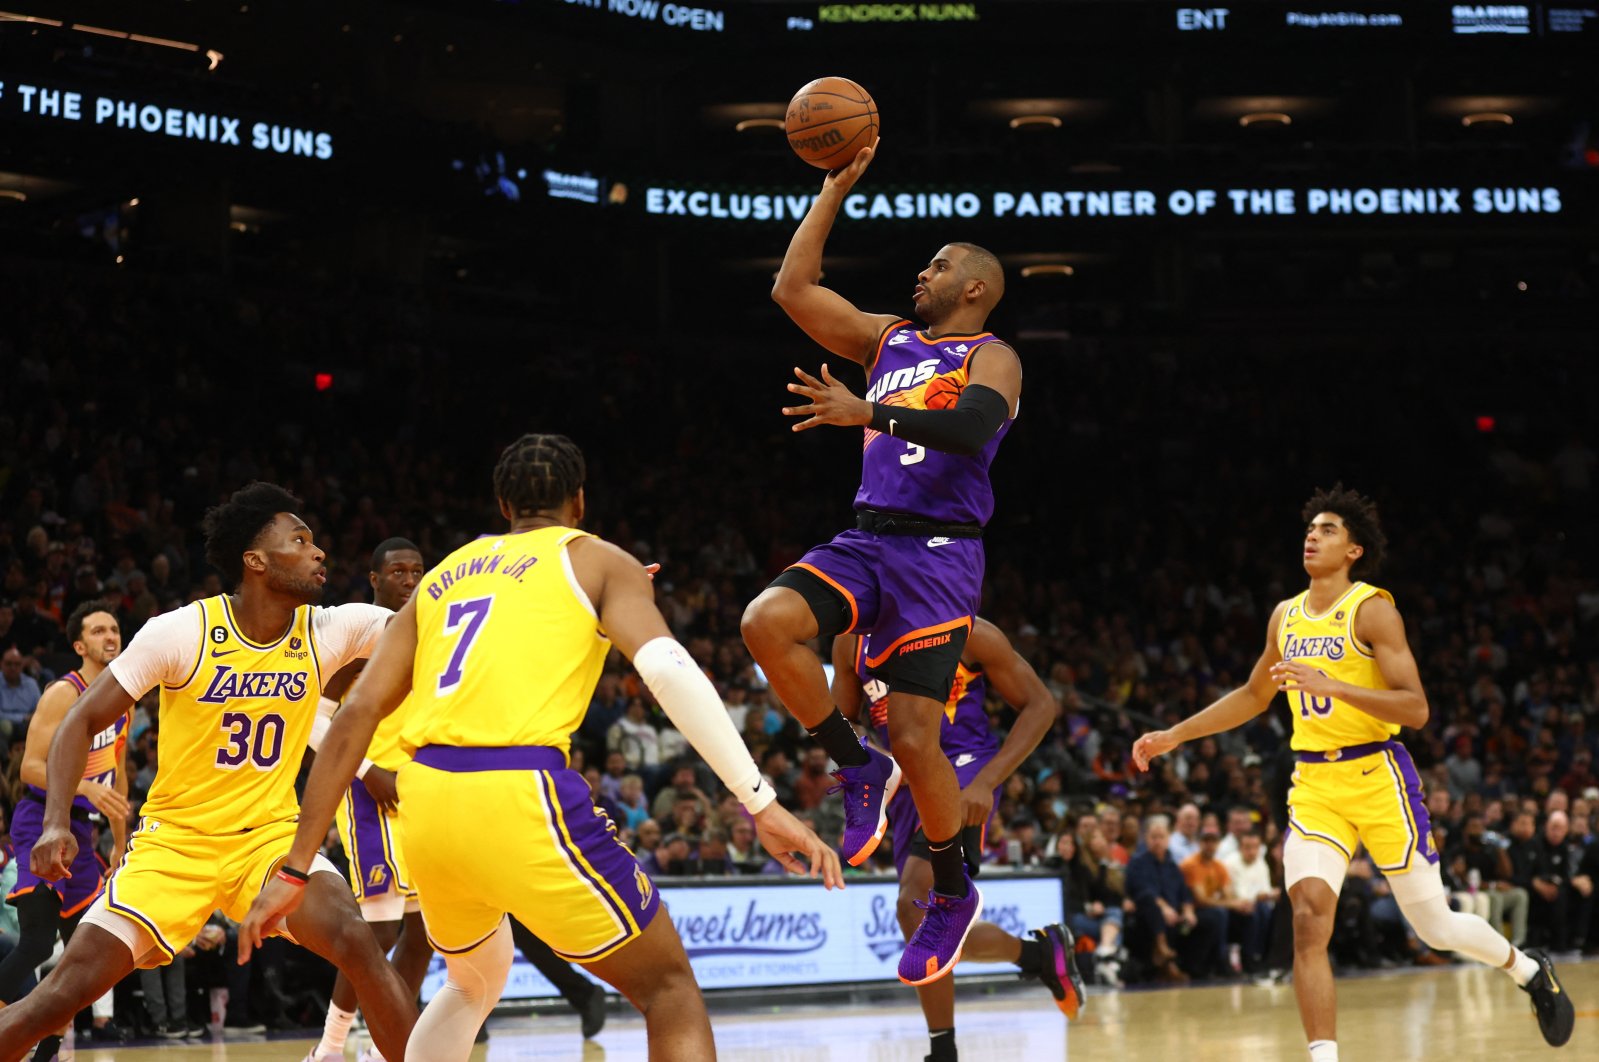 Phoenix Suns guard Chris Paul drives to the hoop against the Los Angeles Lakers in the second half at Footprint Center, Phoenix, Arizona, U.S., Dec. 19, 2022. (Reuters Photo)